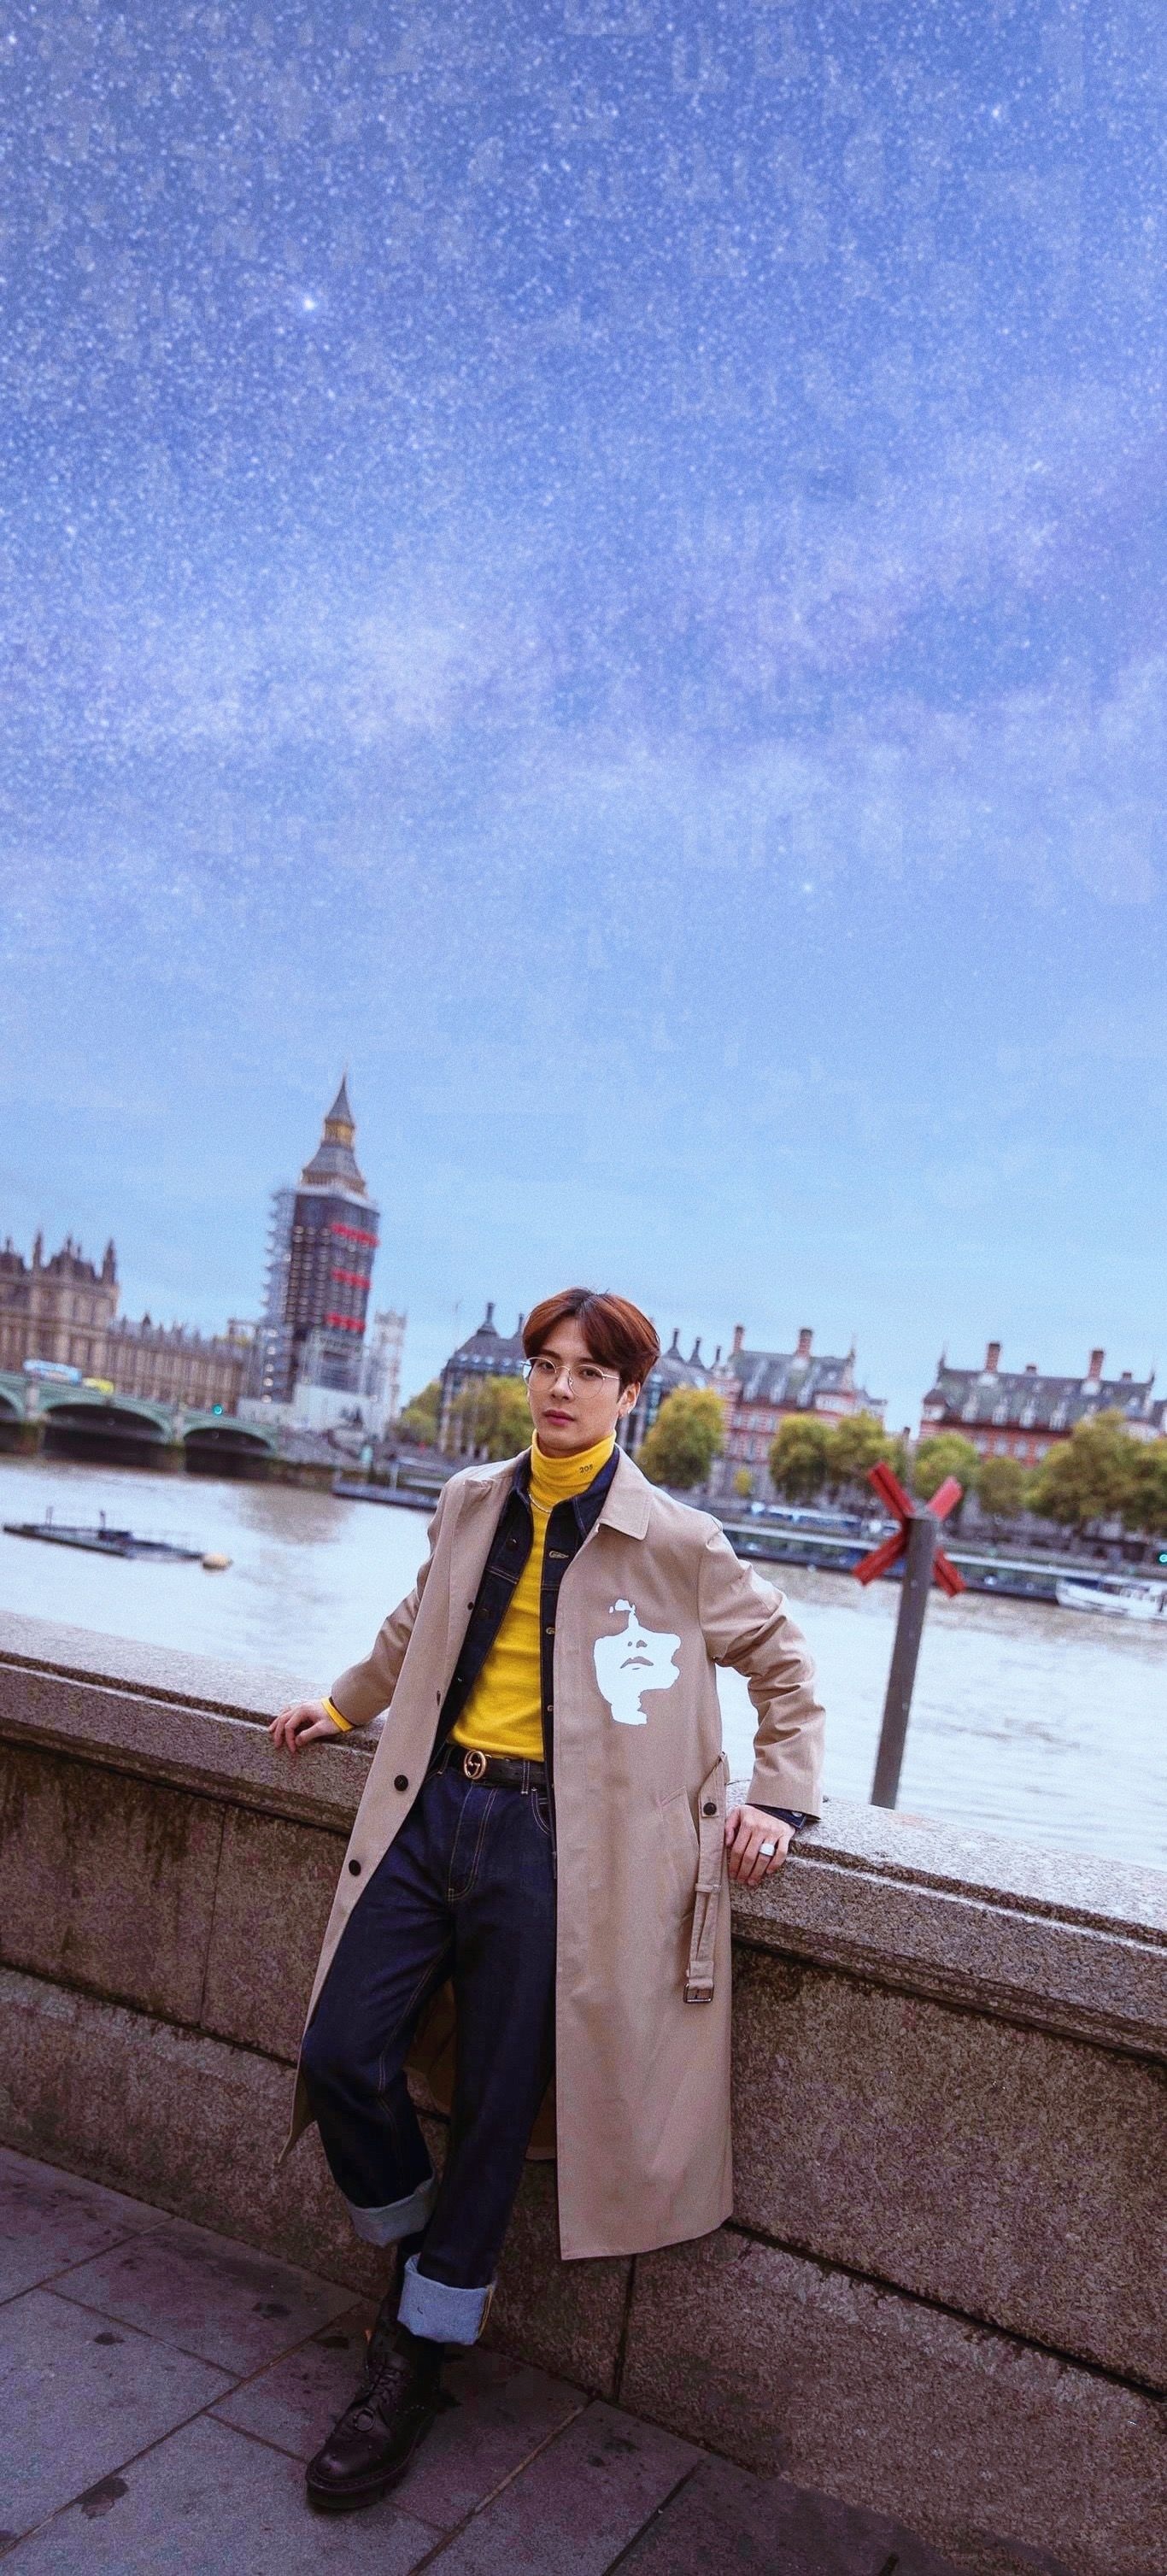 GOT7: Jackson Wang, A Chinese singer, The lead designer for fashion brand Team Wang Design. 1370x3020 HD Background.